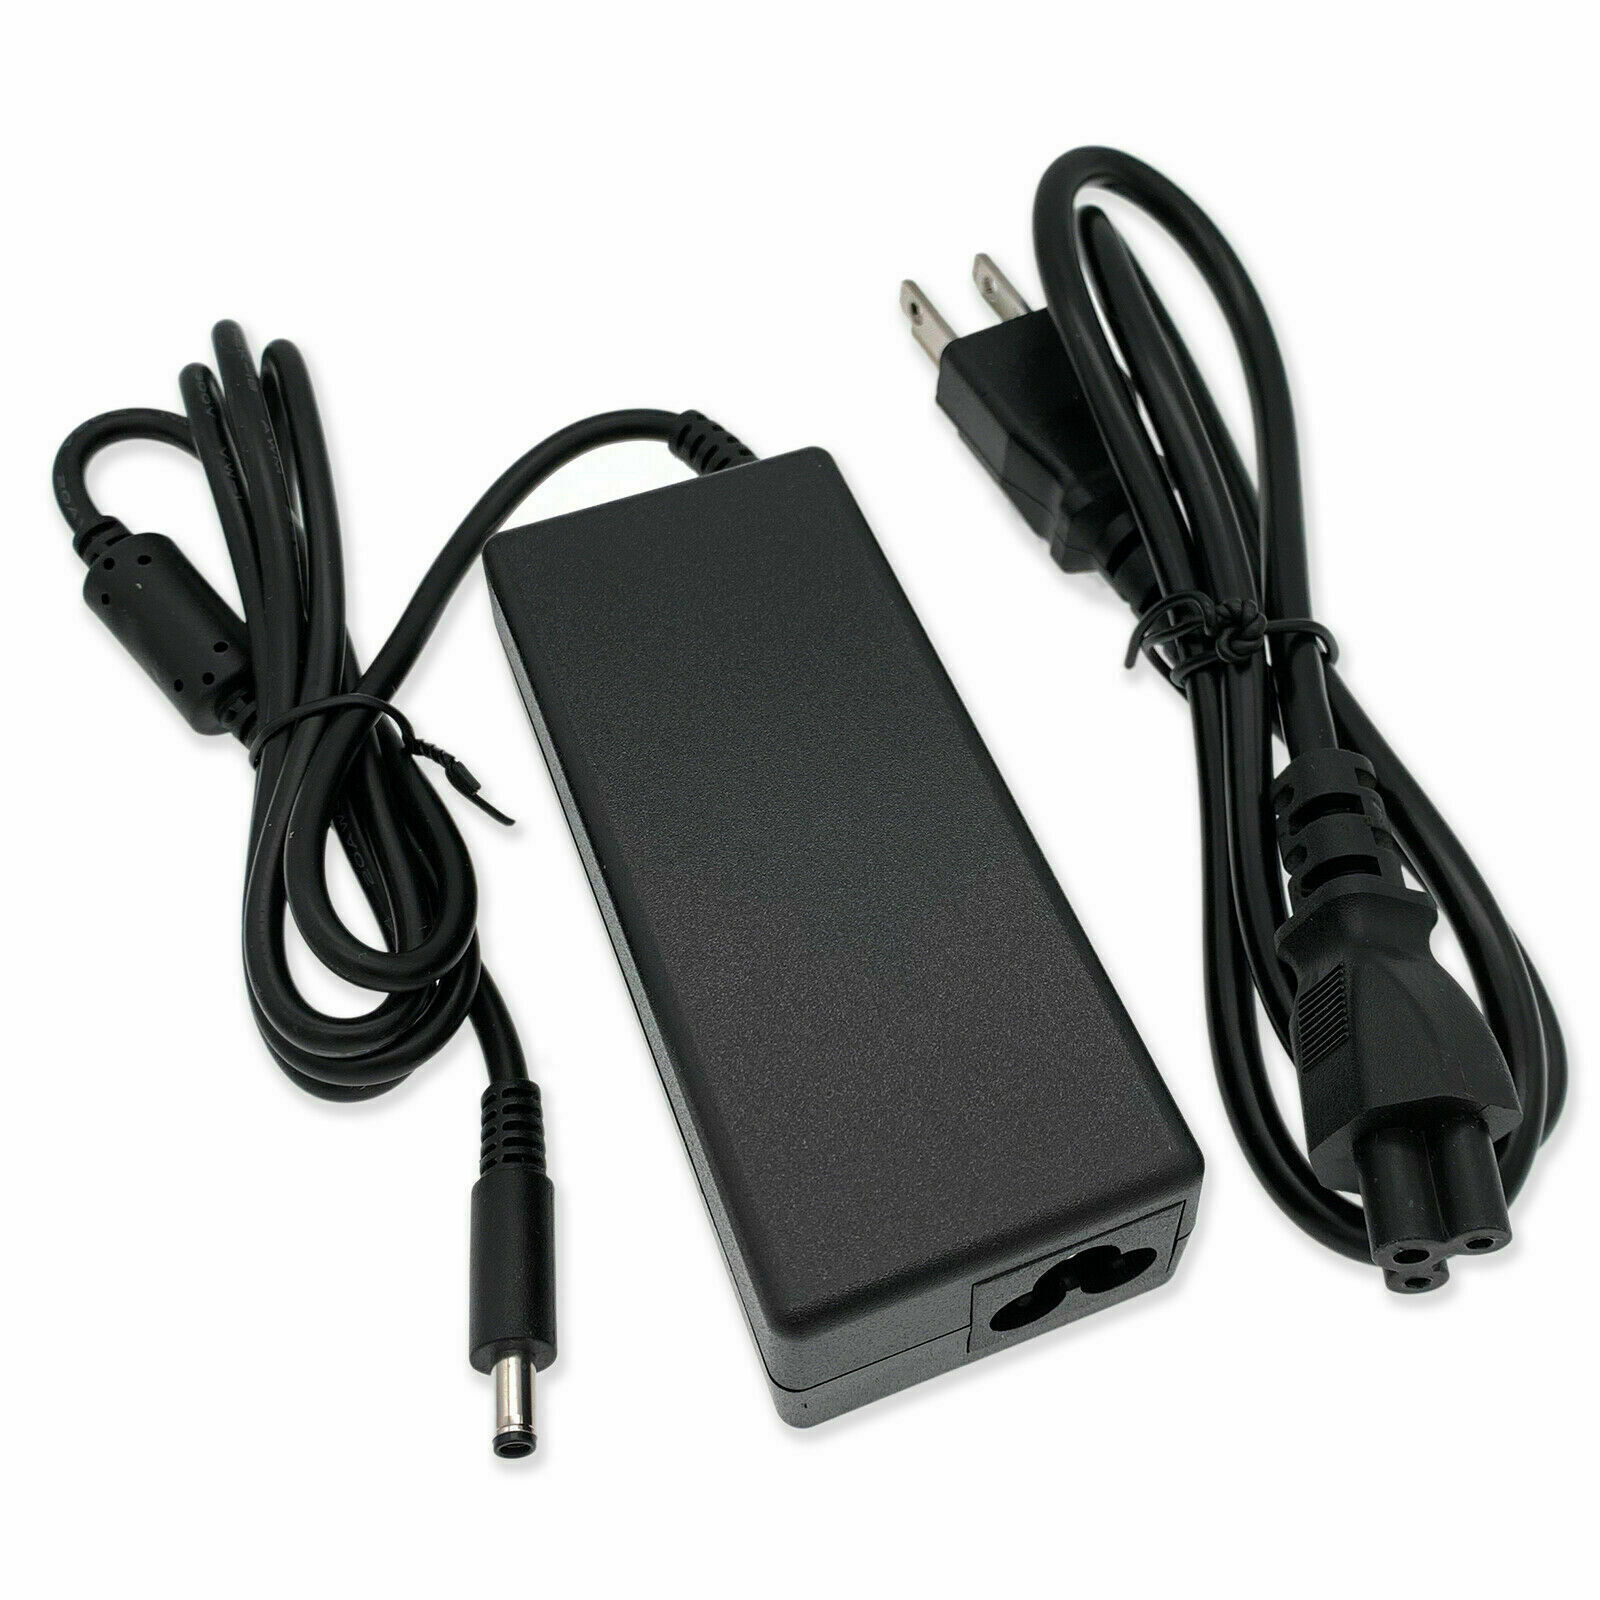 For HP 15-g000 15-g100 15-g200 Laptop 65W AC Adapter Charger Power Supply Cord